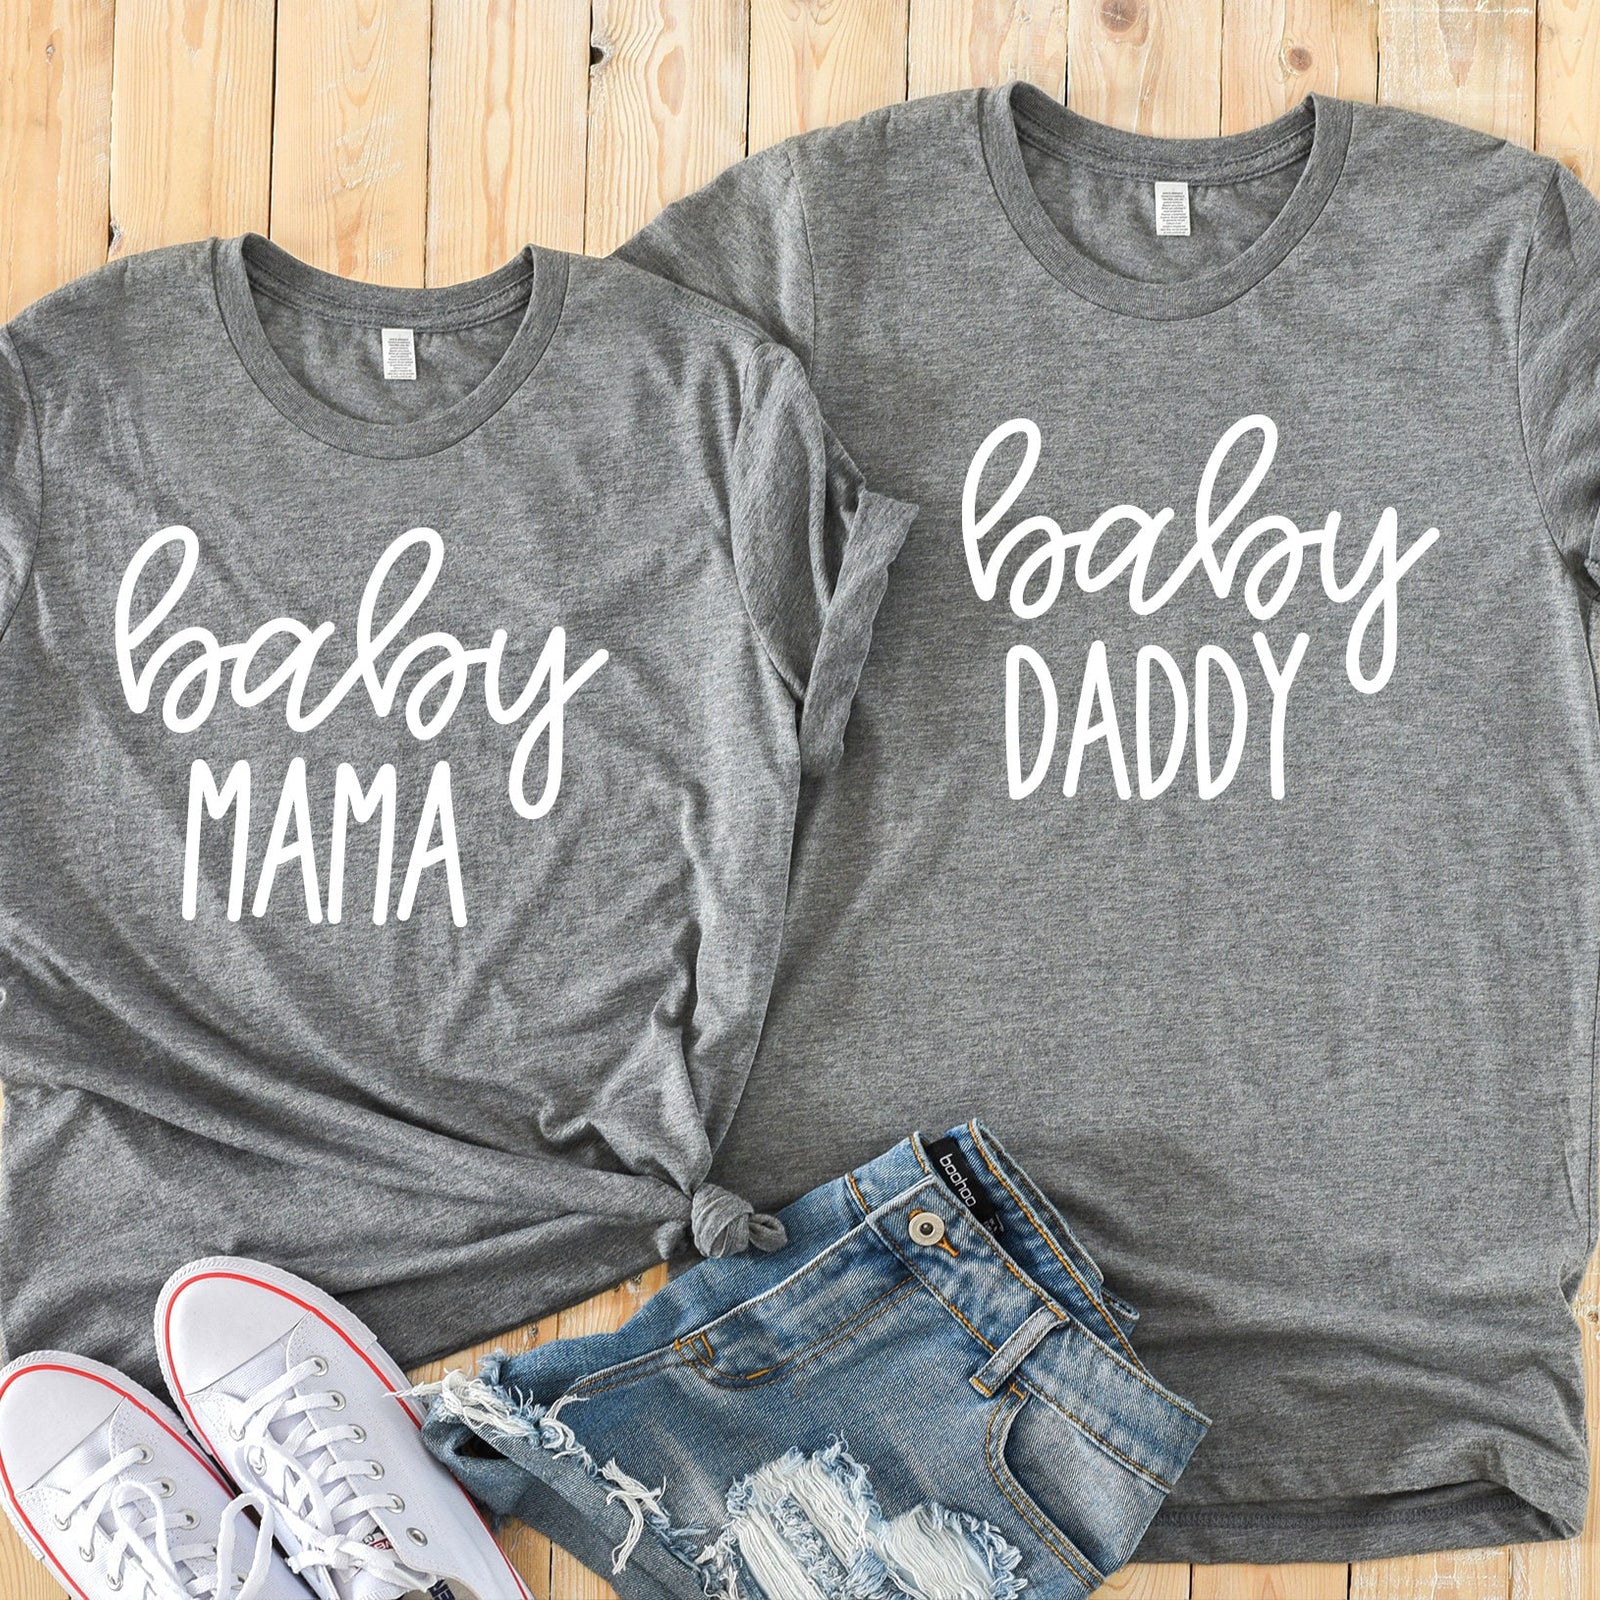 Baby Mama Baby Daddy Couple Shirt - Matching Parents Shirts - Reveal - Baby Announcement Shirt